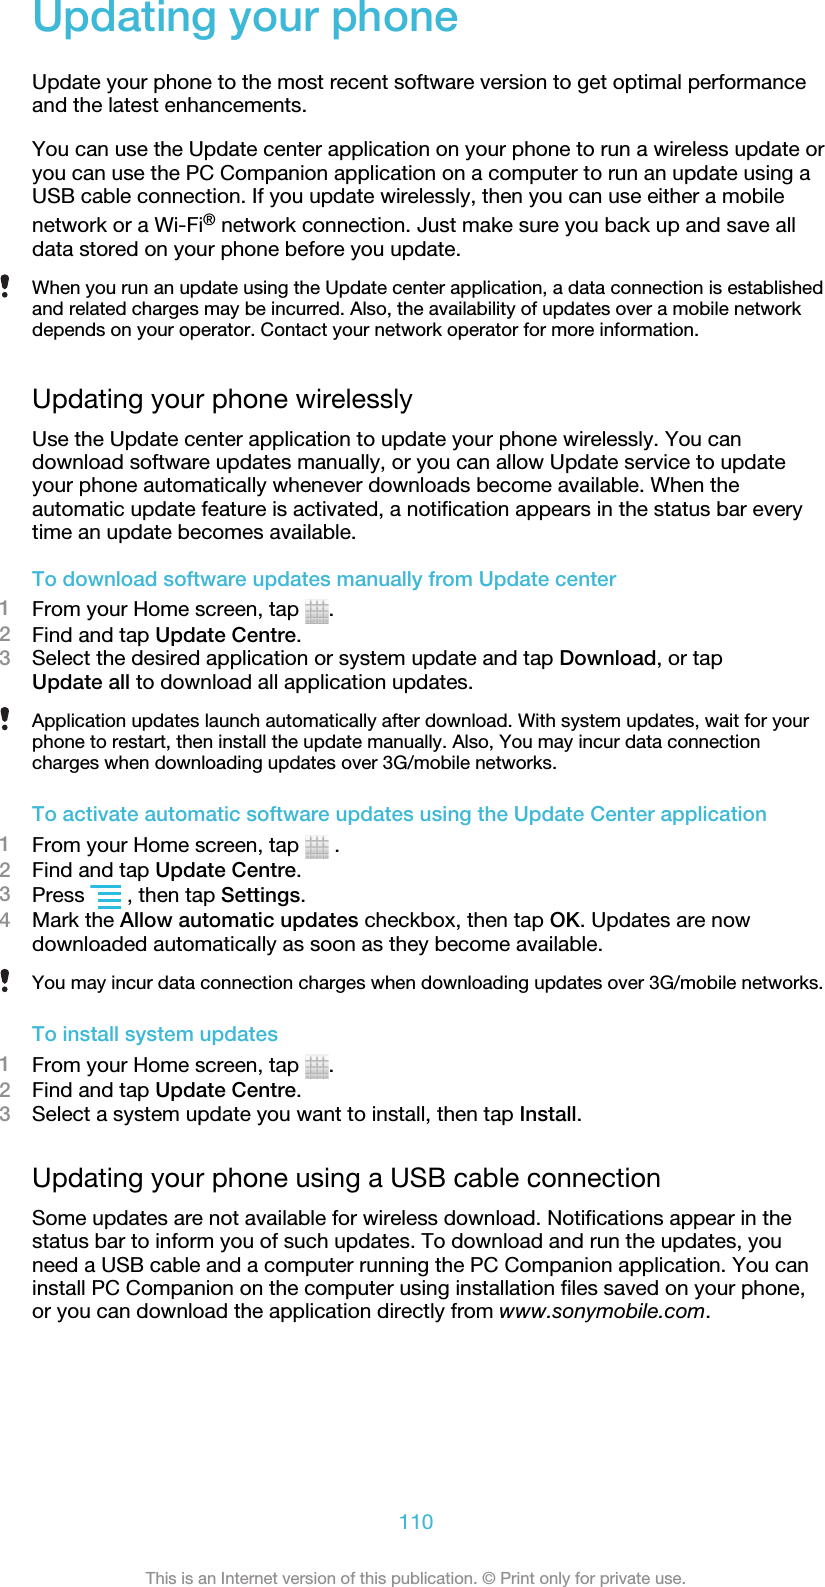 Updating your phoneUpdate your phone to the most recent software version to get optimal performanceand the latest enhancements.You can use the Update center application on your phone to run a wireless update oryou can use the PC Companion application on a computer to run an update using aUSB cable connection. If you update wirelessly, then you can use either a mobilenetwork or a Wi-Fi® network connection. Just make sure you back up and save alldata stored on your phone before you update.When you run an update using the Update center application, a data connection is establishedand related charges may be incurred. Also, the availability of updates over a mobile networkdepends on your operator. Contact your network operator for more information.Updating your phone wirelesslyUse the Update center application to update your phone wirelessly. You candownload software updates manually, or you can allow Update service to updateyour phone automatically whenever downloads become available. When theautomatic update feature is activated, a notification appears in the status bar everytime an update becomes available.To download software updates manually from Update center1From your Home screen, tap  .2Find and tap Update Centre.3Select the desired application or system update and tap Download, or tapUpdate all to download all application updates.Application updates launch automatically after download. With system updates, wait for yourphone to restart, then install the update manually. Also, You may incur data connectioncharges when downloading updates over 3G/mobile networks.To activate automatic software updates using the Update Center application1From your Home screen, tap   .2Find and tap Update Centre.3Press   , then tap Settings.4Mark the Allow automatic updates checkbox, then tap OK. Updates are nowdownloaded automatically as soon as they become available.You may incur data connection charges when downloading updates over 3G/mobile networks.To install system updates1From your Home screen, tap  .2Find and tap Update Centre.3Select a system update you want to install, then tap Install.Updating your phone using a USB cable connectionSome updates are not available for wireless download. Notifications appear in thestatus bar to inform you of such updates. To download and run the updates, youneed a USB cable and a computer running the PC Companion application. You caninstall PC Companion on the computer using installation files saved on your phone,or you can download the application directly from www.sonymobile.com.110This is an Internet version of this publication. © Print only for private use.